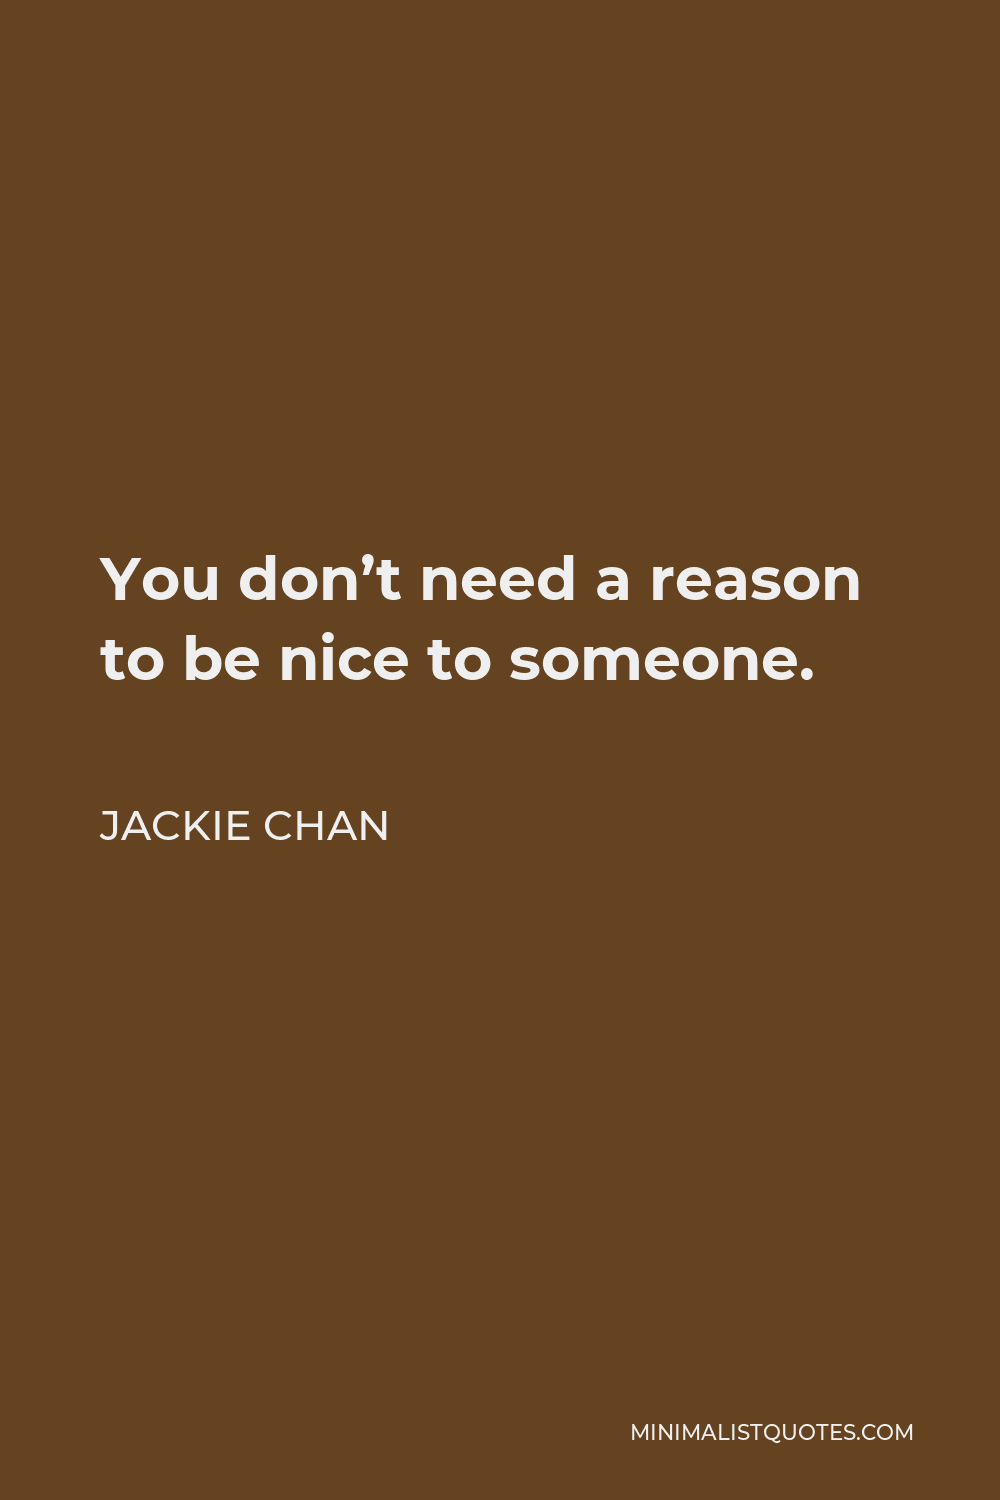 Jackie Chan Quote - You don’t need a reason to be nice to someone.